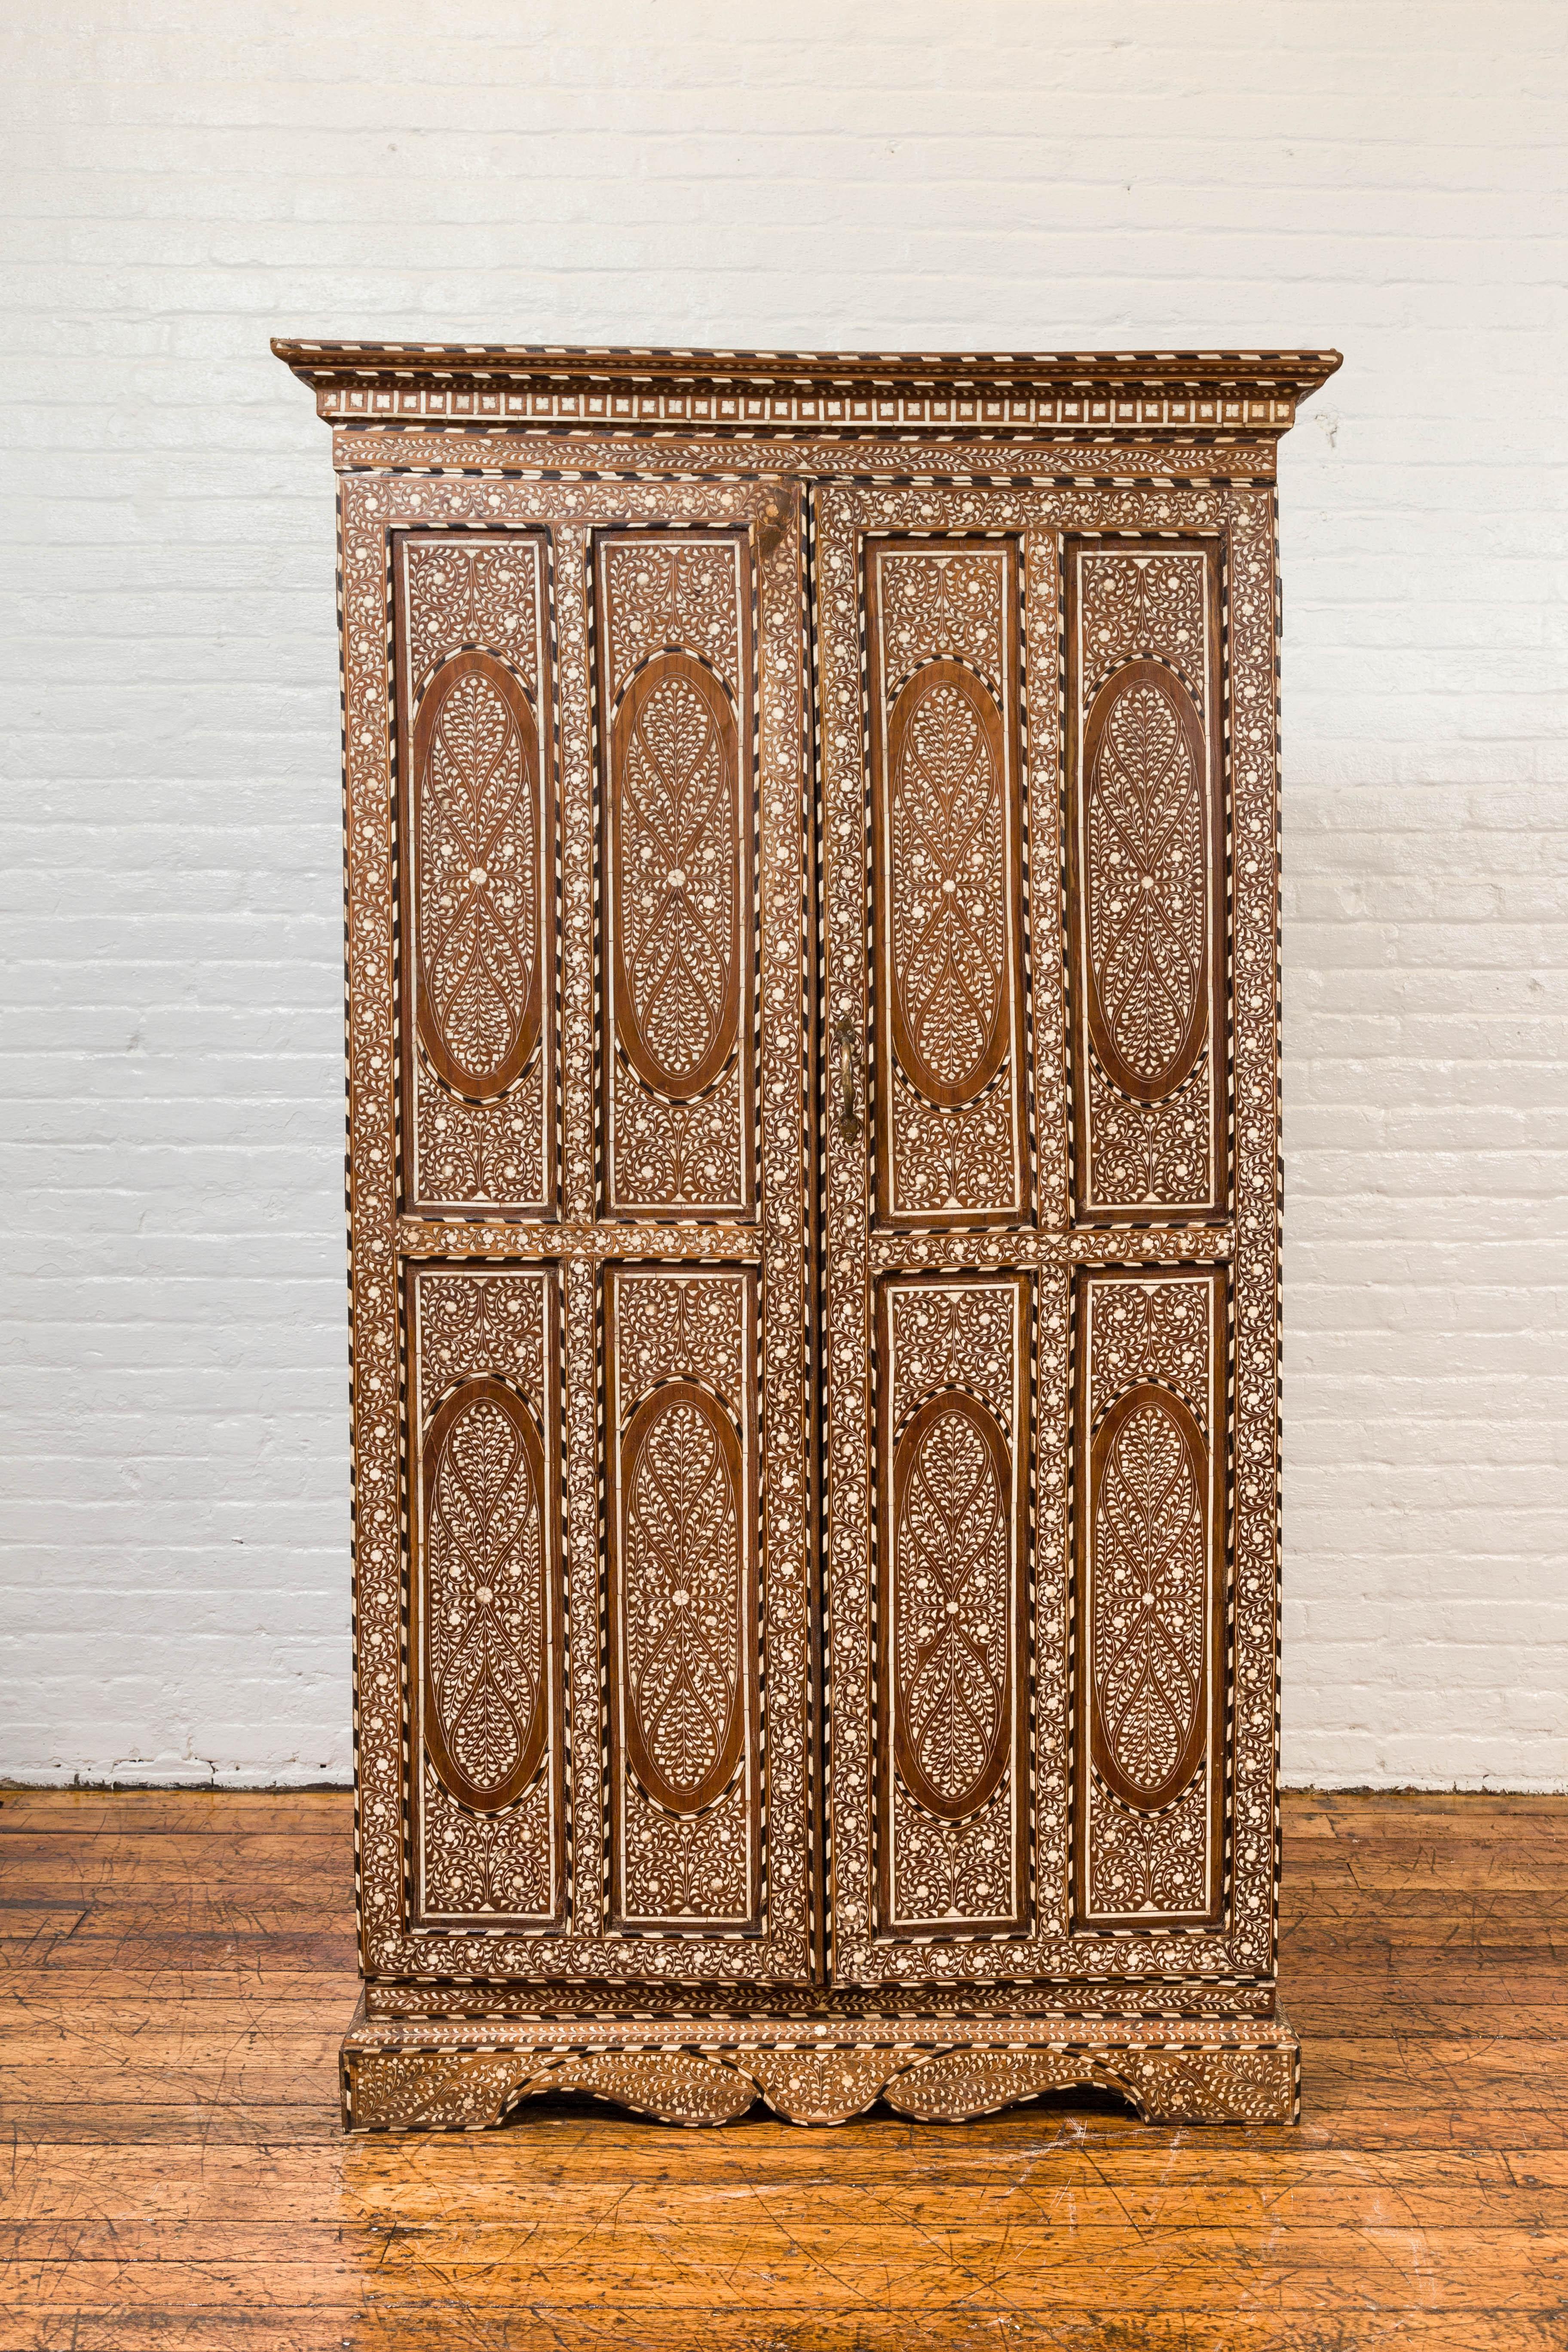 A vintage Anglo-Indian inlaid wooden wardrobe cabinet from the mid-20th century, with ebonized accents, bone and horn inlay. Capturing our attention with its intricate decor, his tall cabinet is adorned with an abundant décor of foliage and